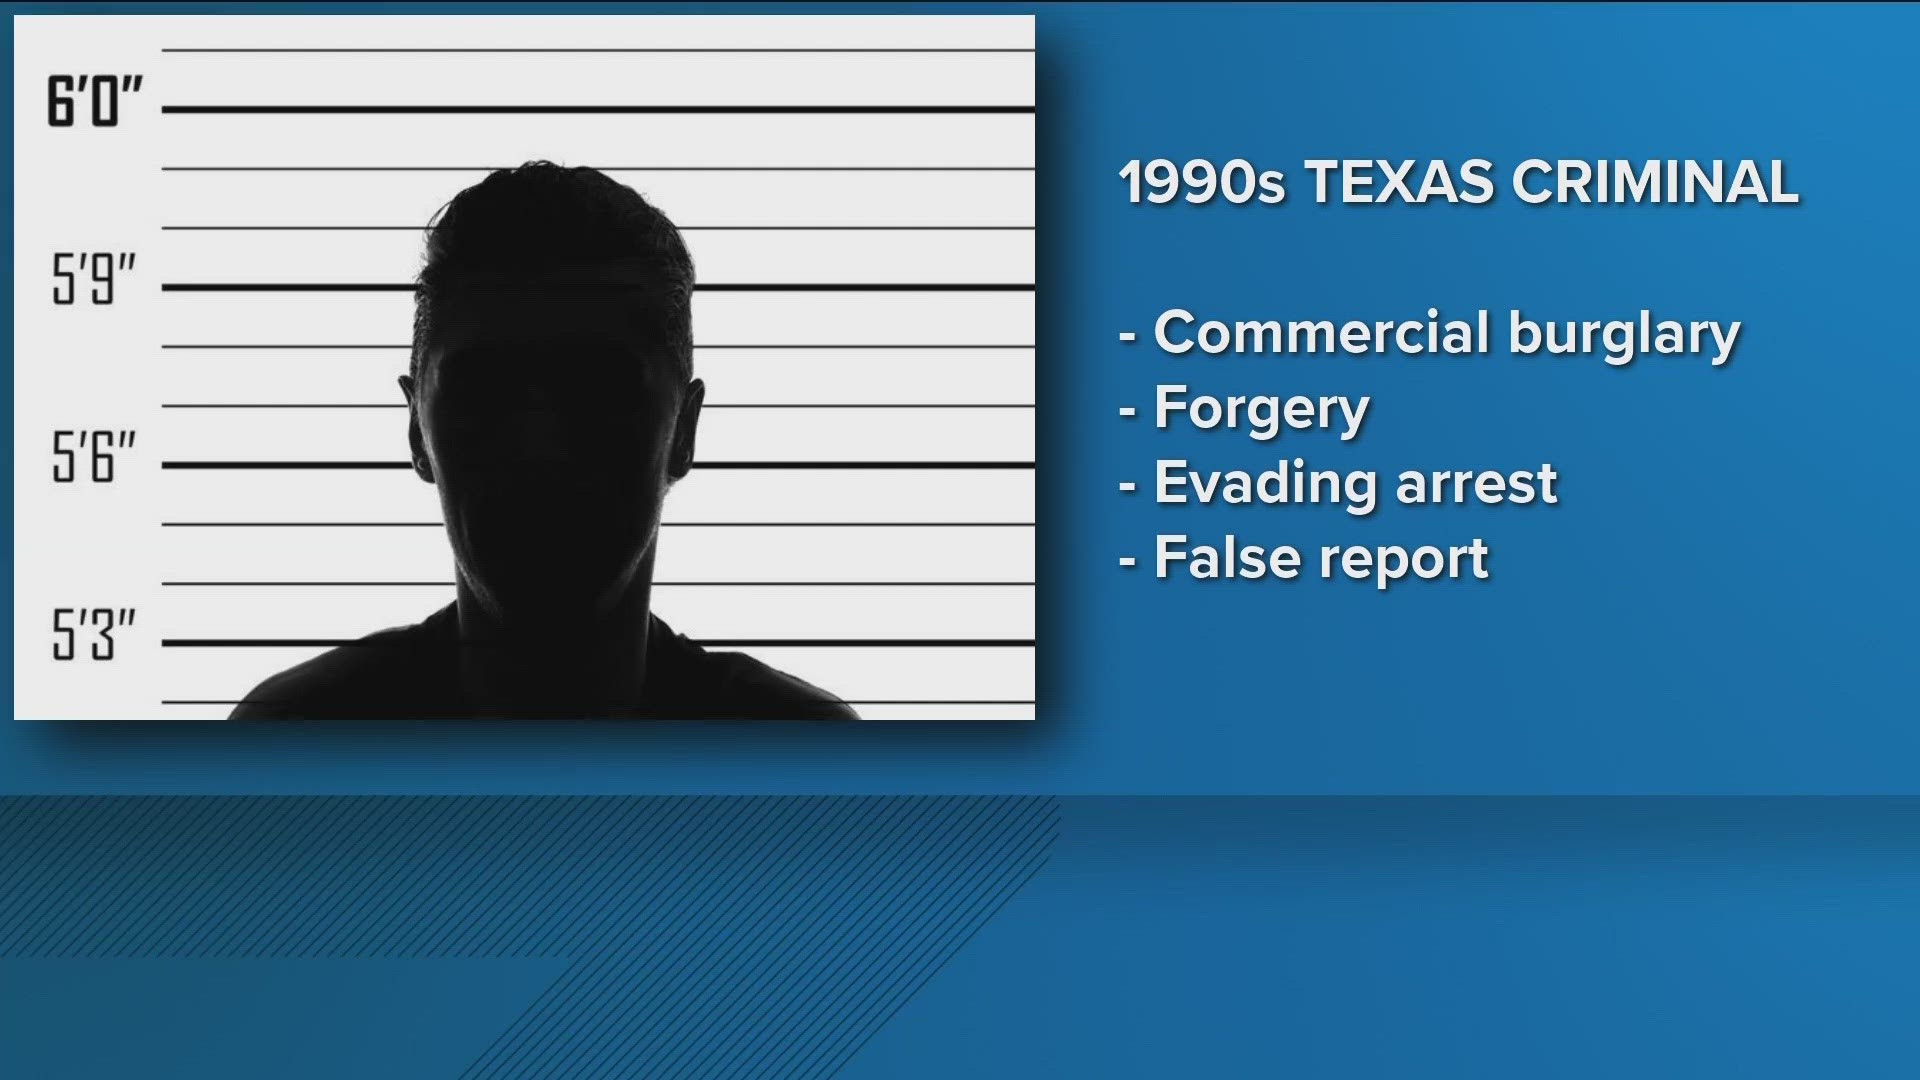 Banks had a series of criminal cases when he lived in Sweetwater, Texas, including commercial burglary, forgery, evading arrest, and filing a false report.